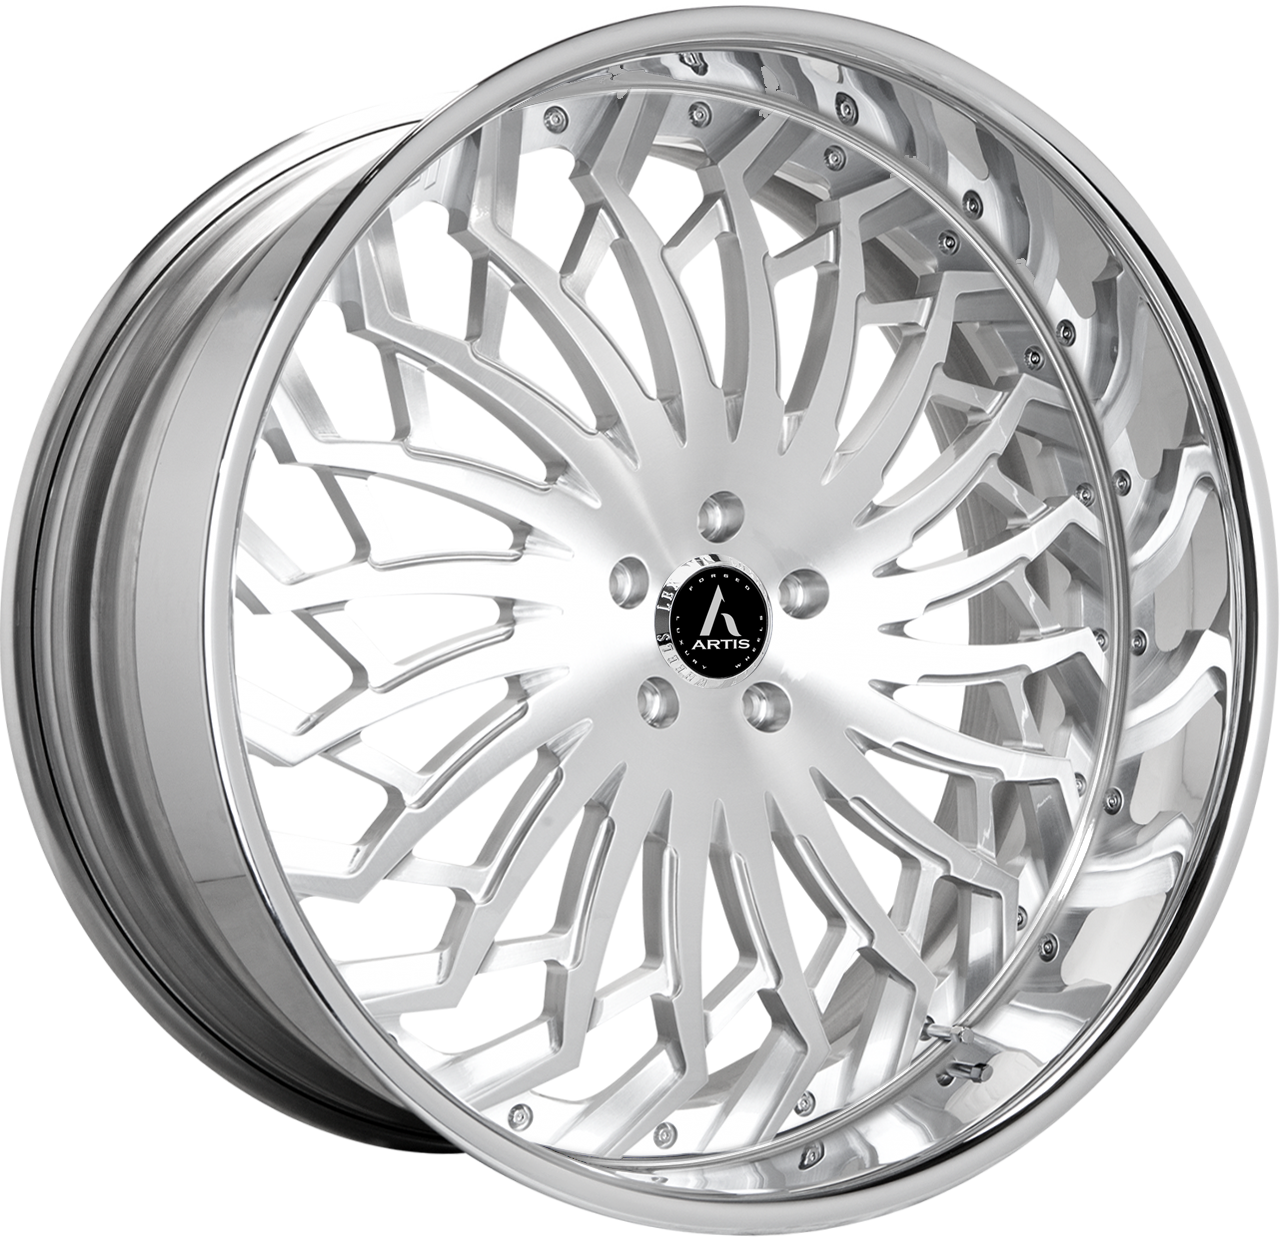 Artis Forged Spartacus-M wheel with Brushed finish